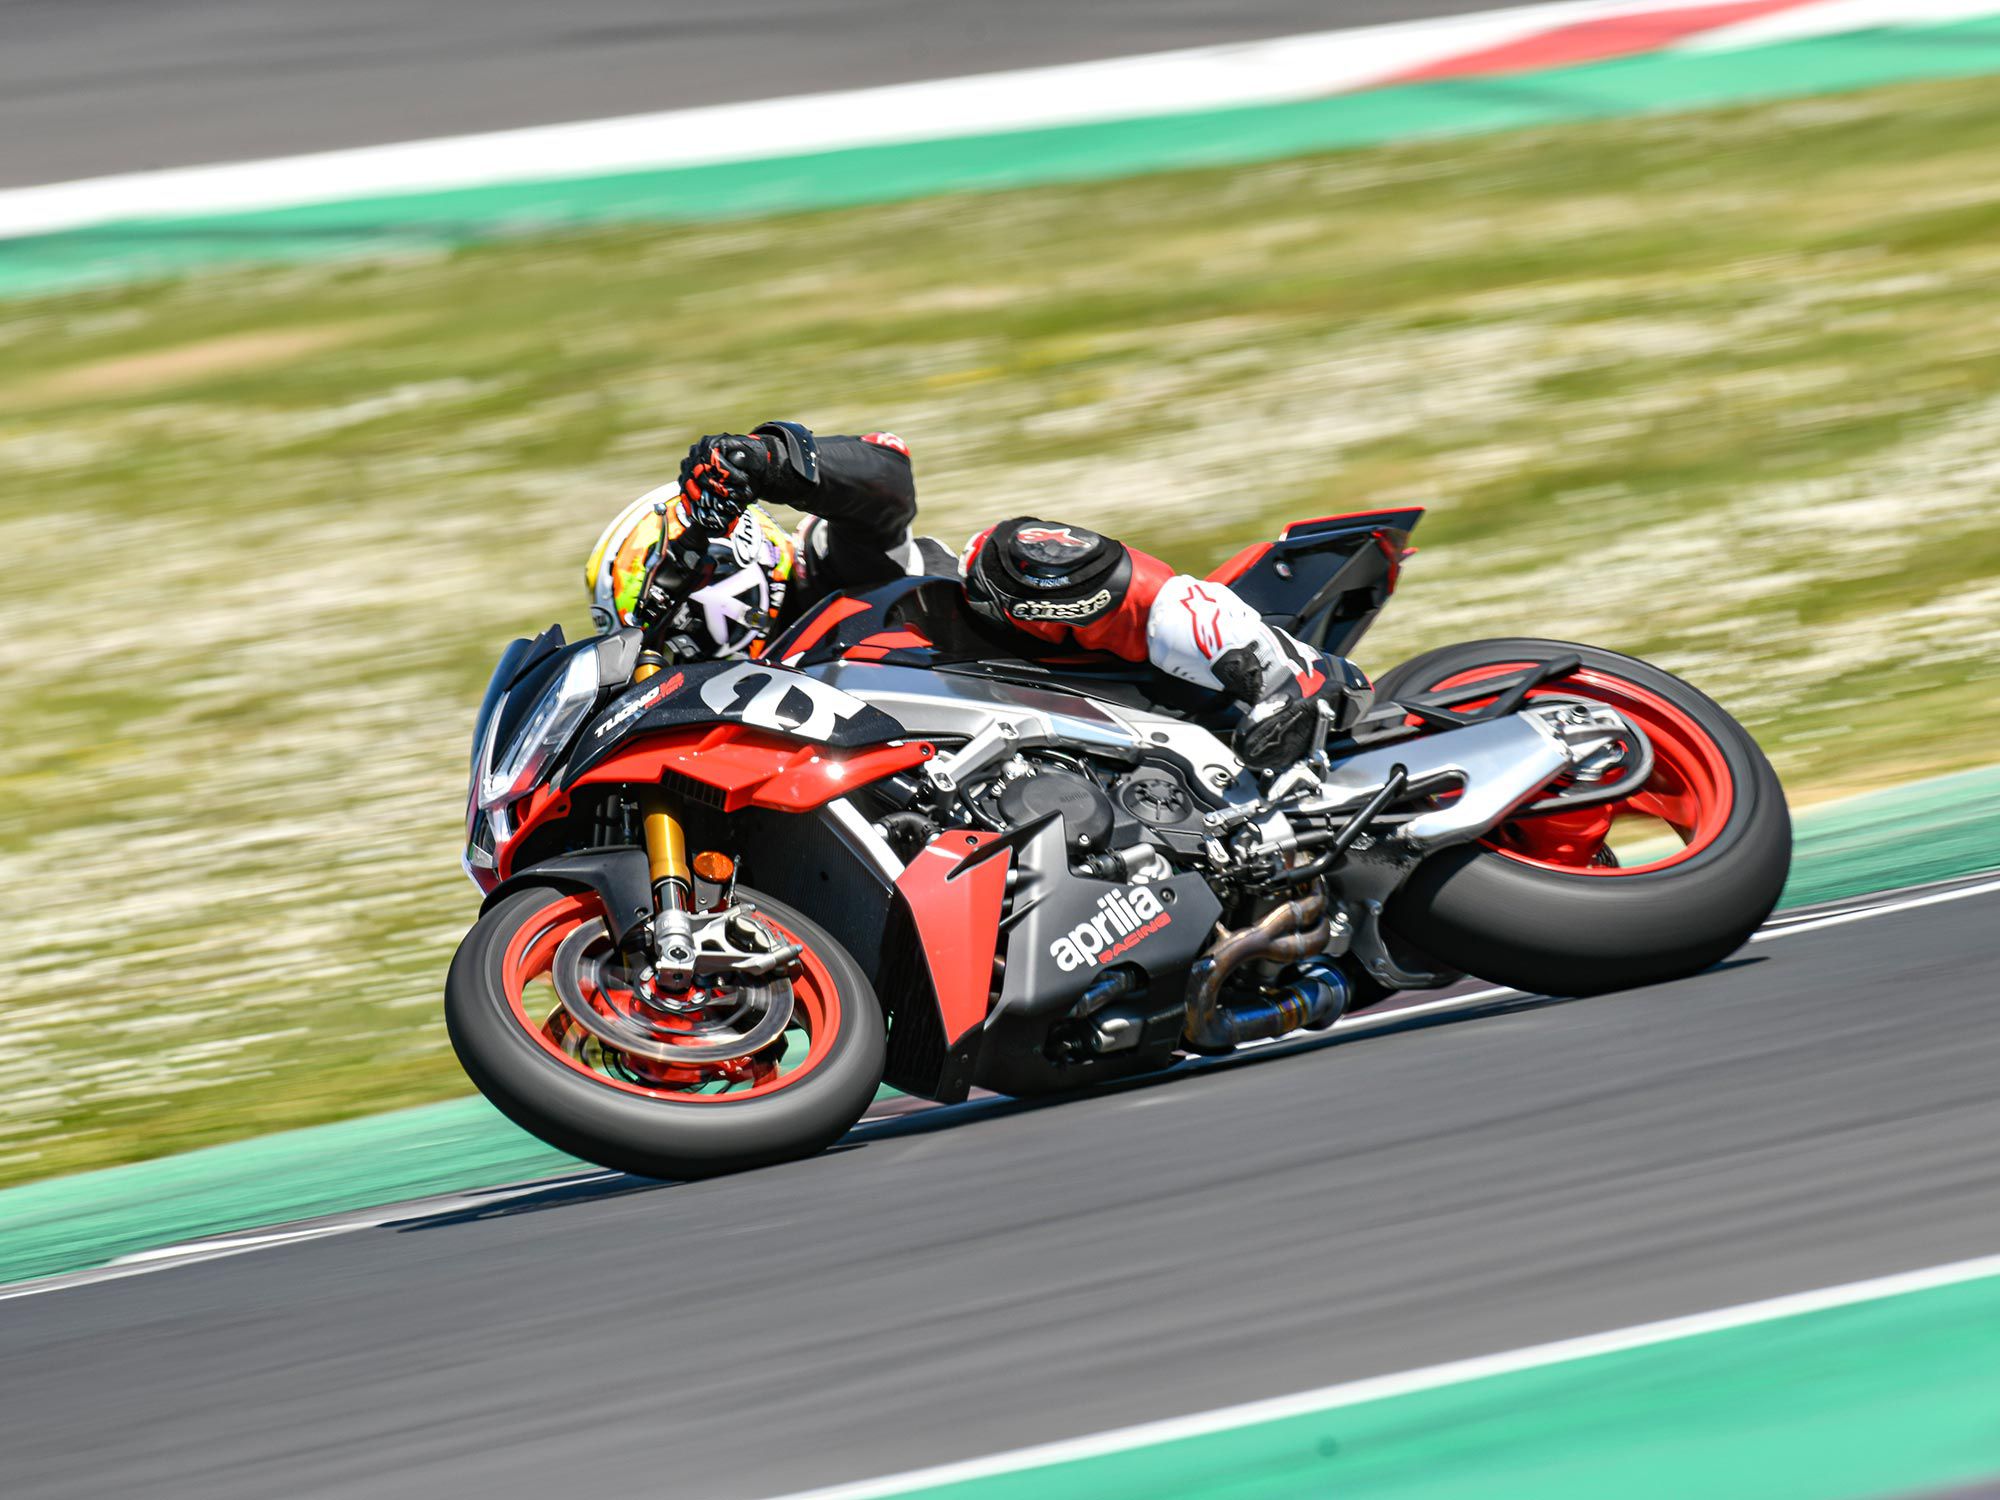 We got lucky: fresh Pirelli slicks, the Misano MotoGP racetrack, and the perfect weather conditions to test Aprilia’s latest Tuono V4 Factory.